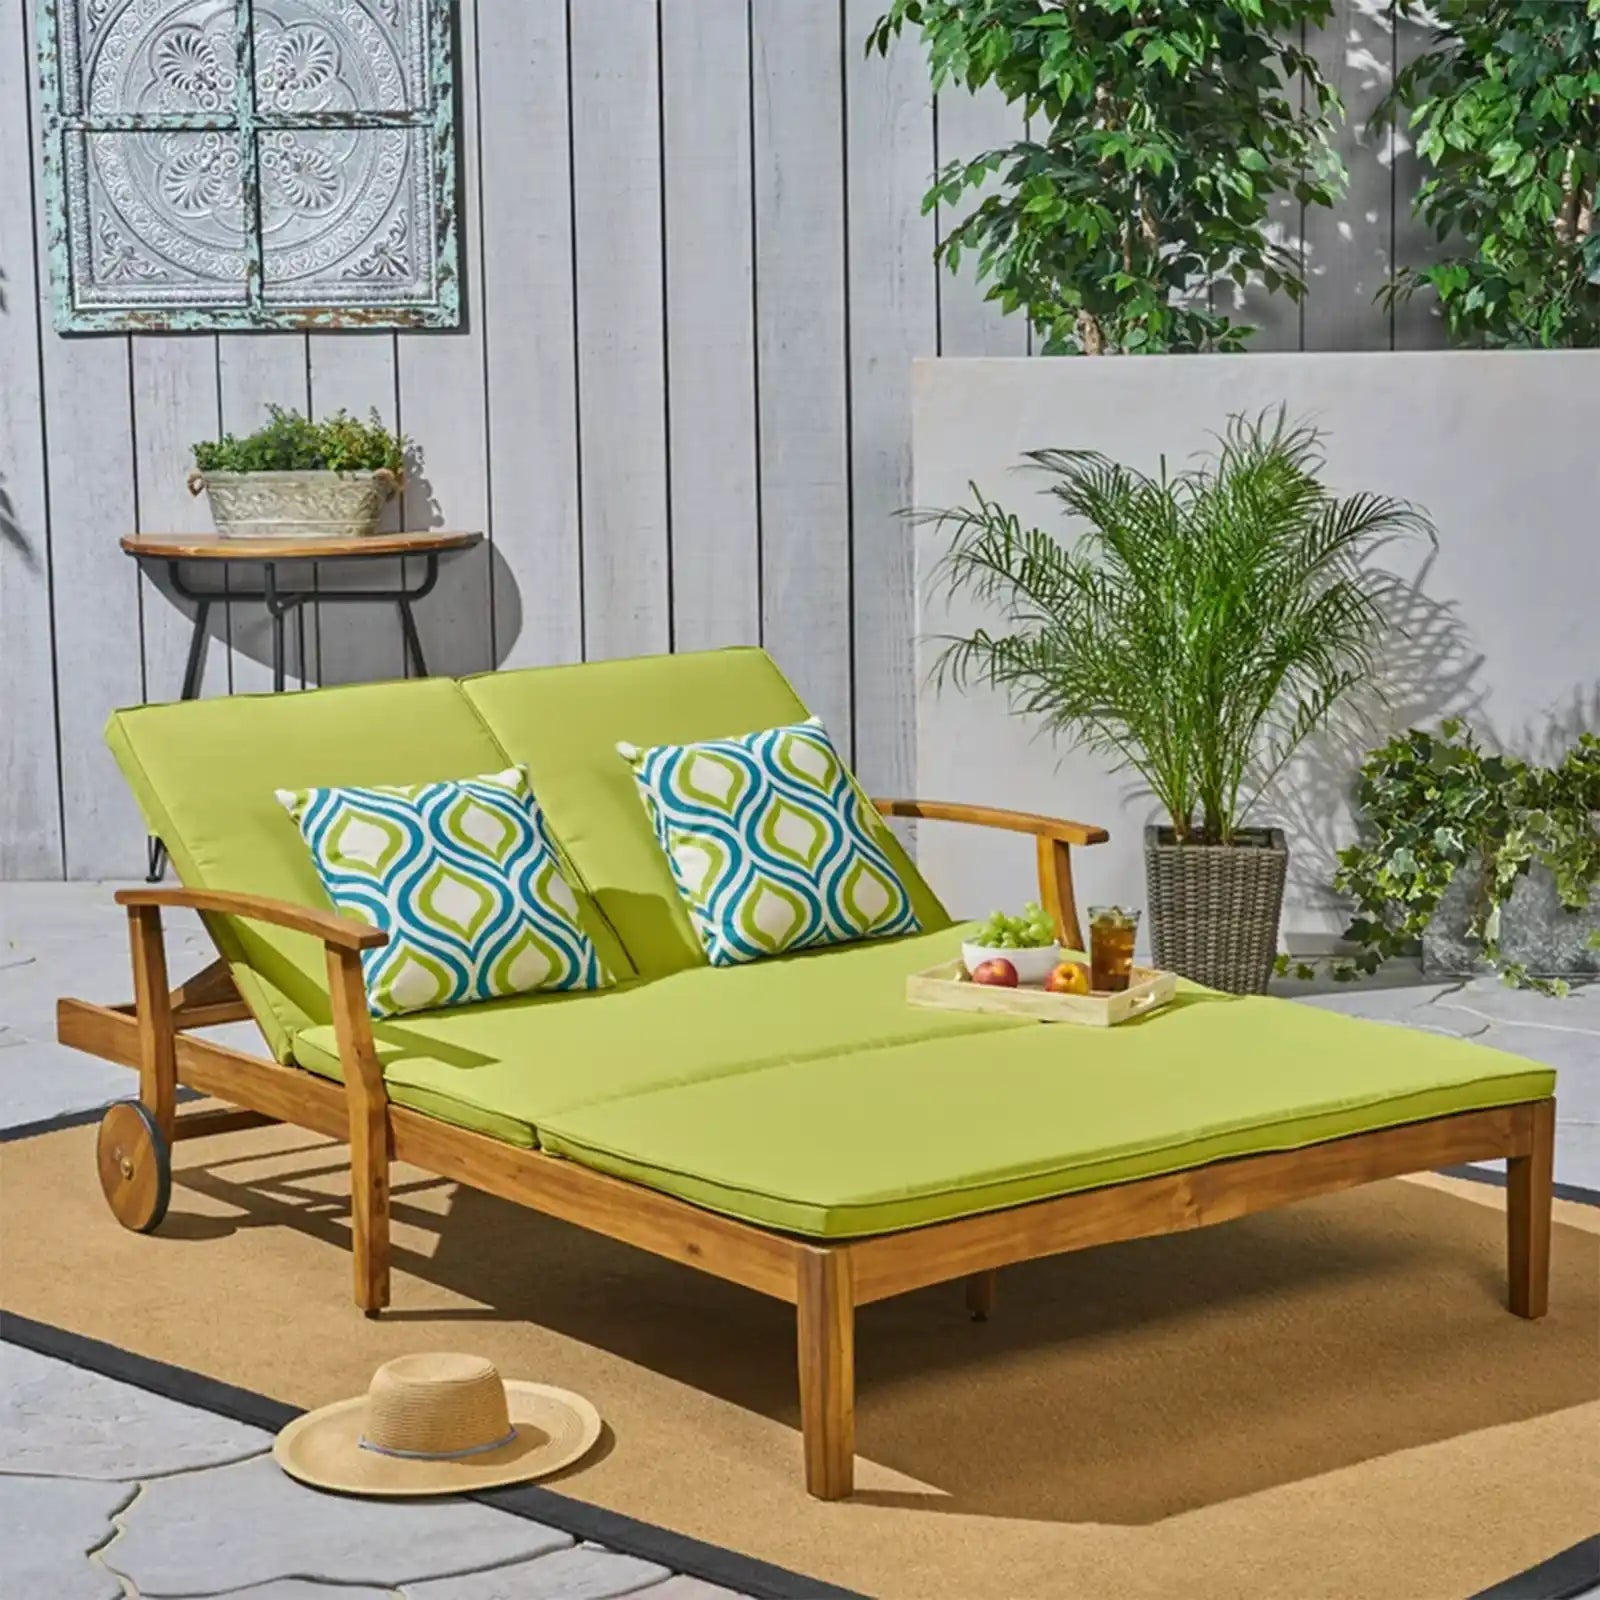 Outdoor Acacia Wood Double Chaise Lounge with Cushion